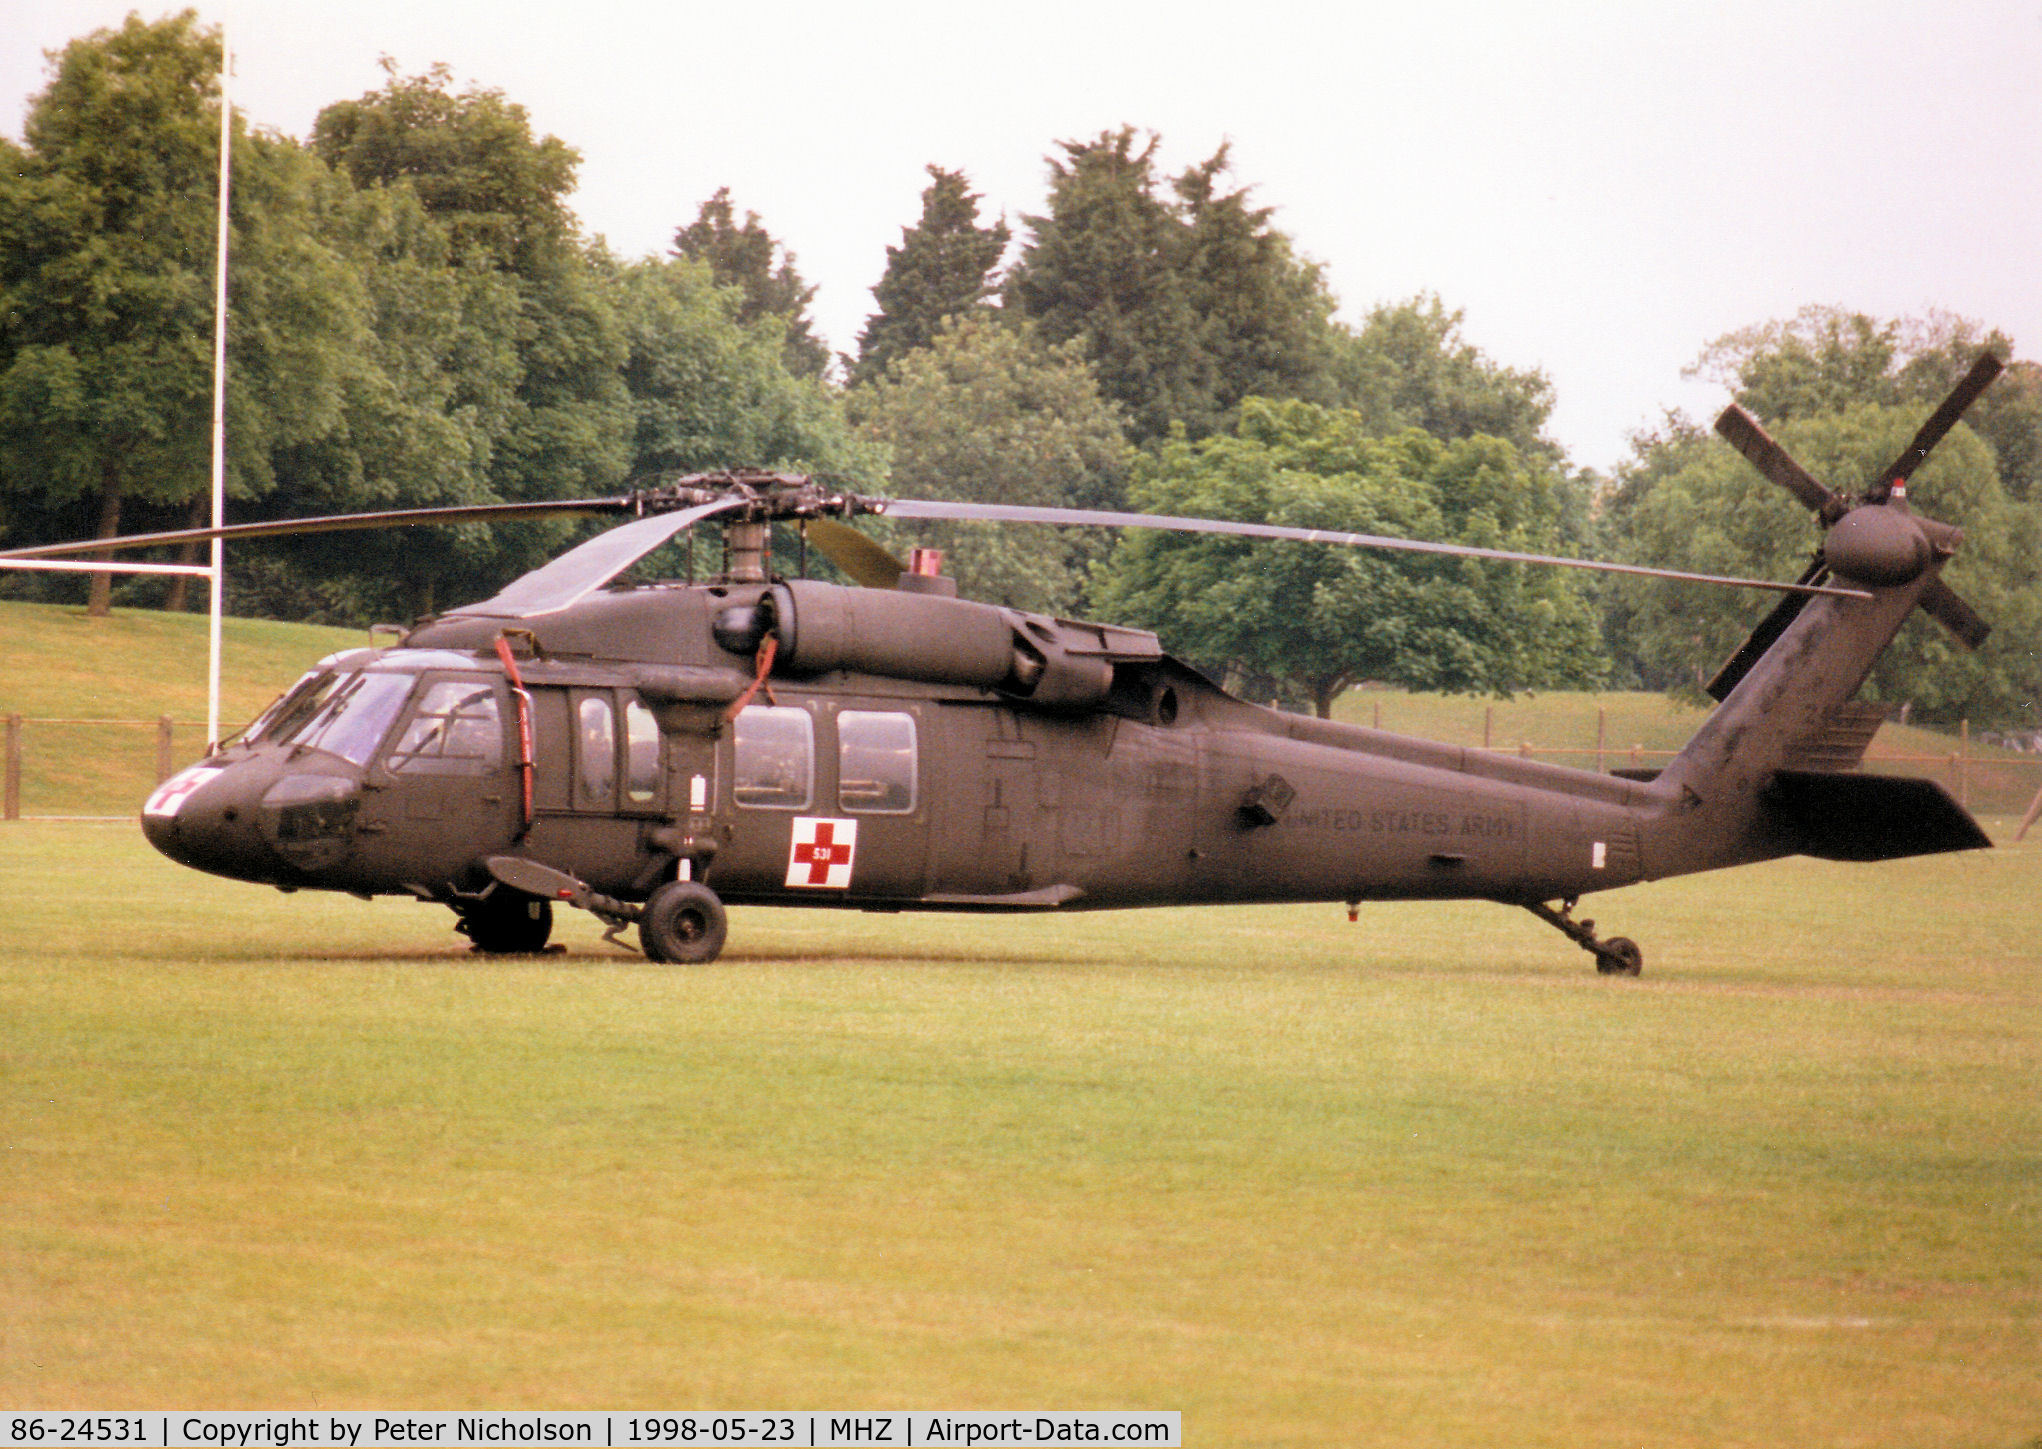 86-24531, 1986 Sikorsky UH-60A Black Hawk C/N 70.1037, UH-60A Blackhawk of the US Army's 45th Medical Company based in Germany on duty at the 1998 RAF Mildenhall Air Fete.